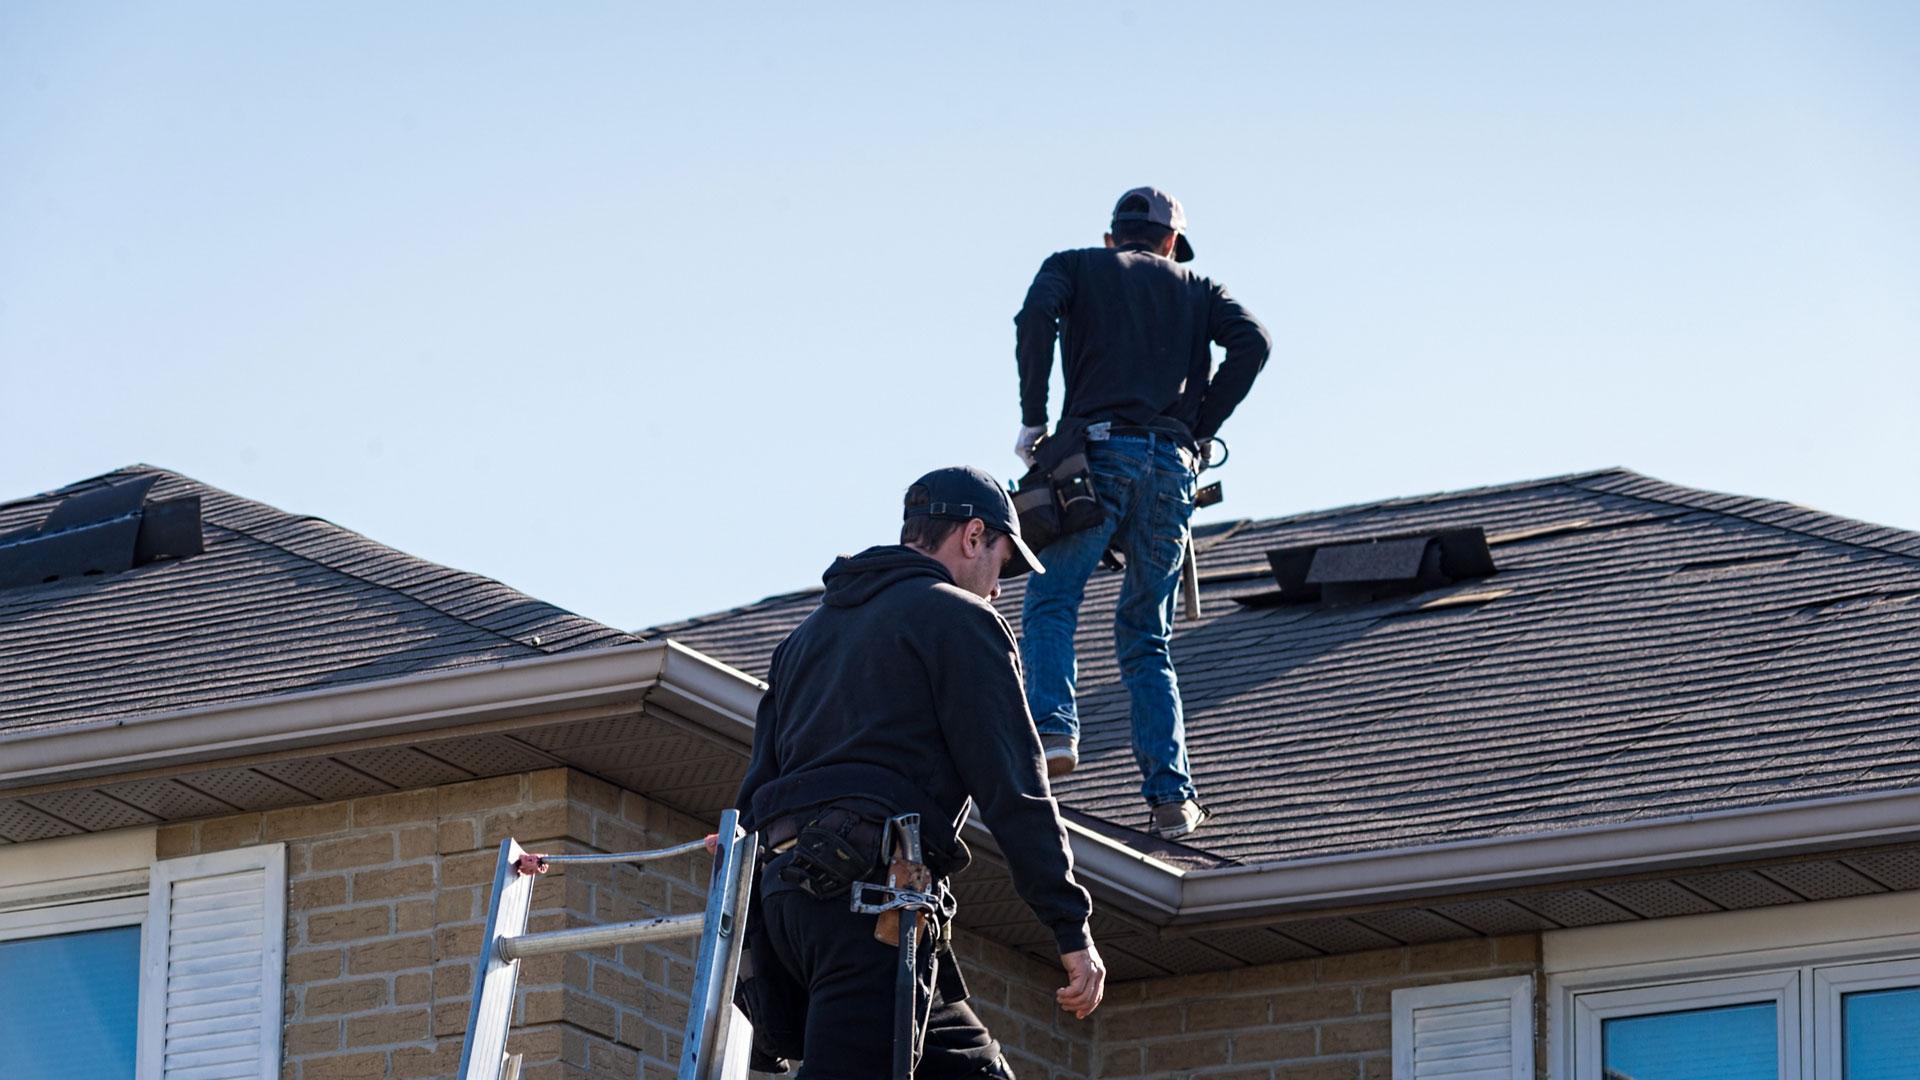 Houston roofing company conducting Sugar Land seasonal roof inspection for free